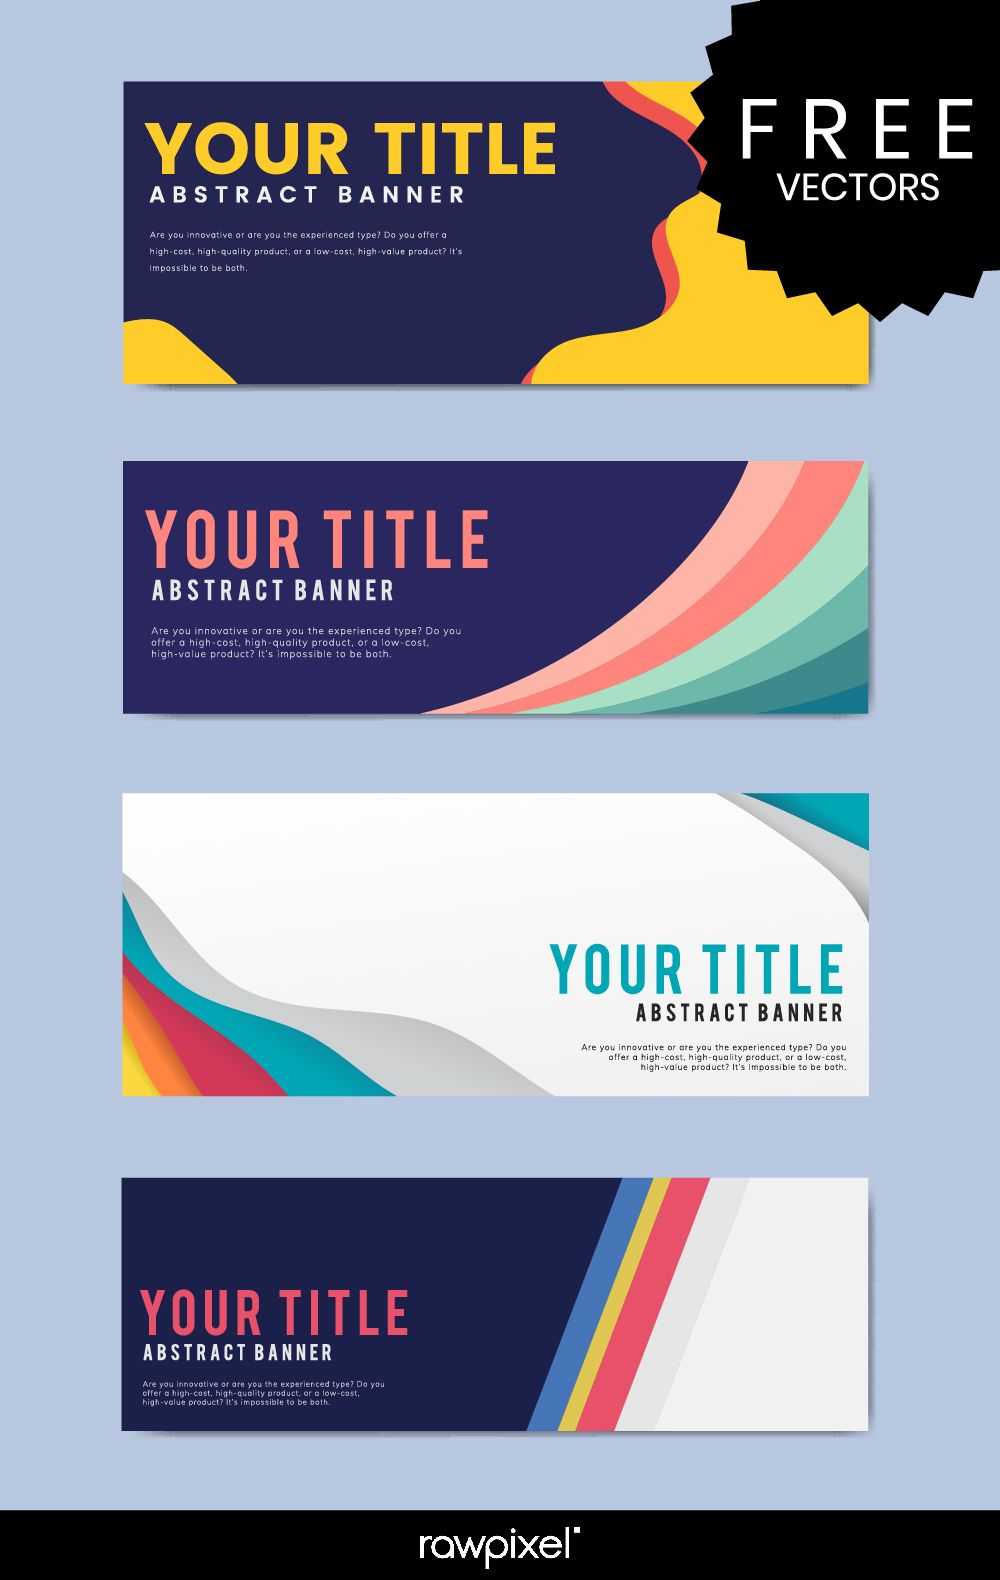 Download Free Modern Business Banner Templates At Rawpixel Inside Free Website Banner Templates Download